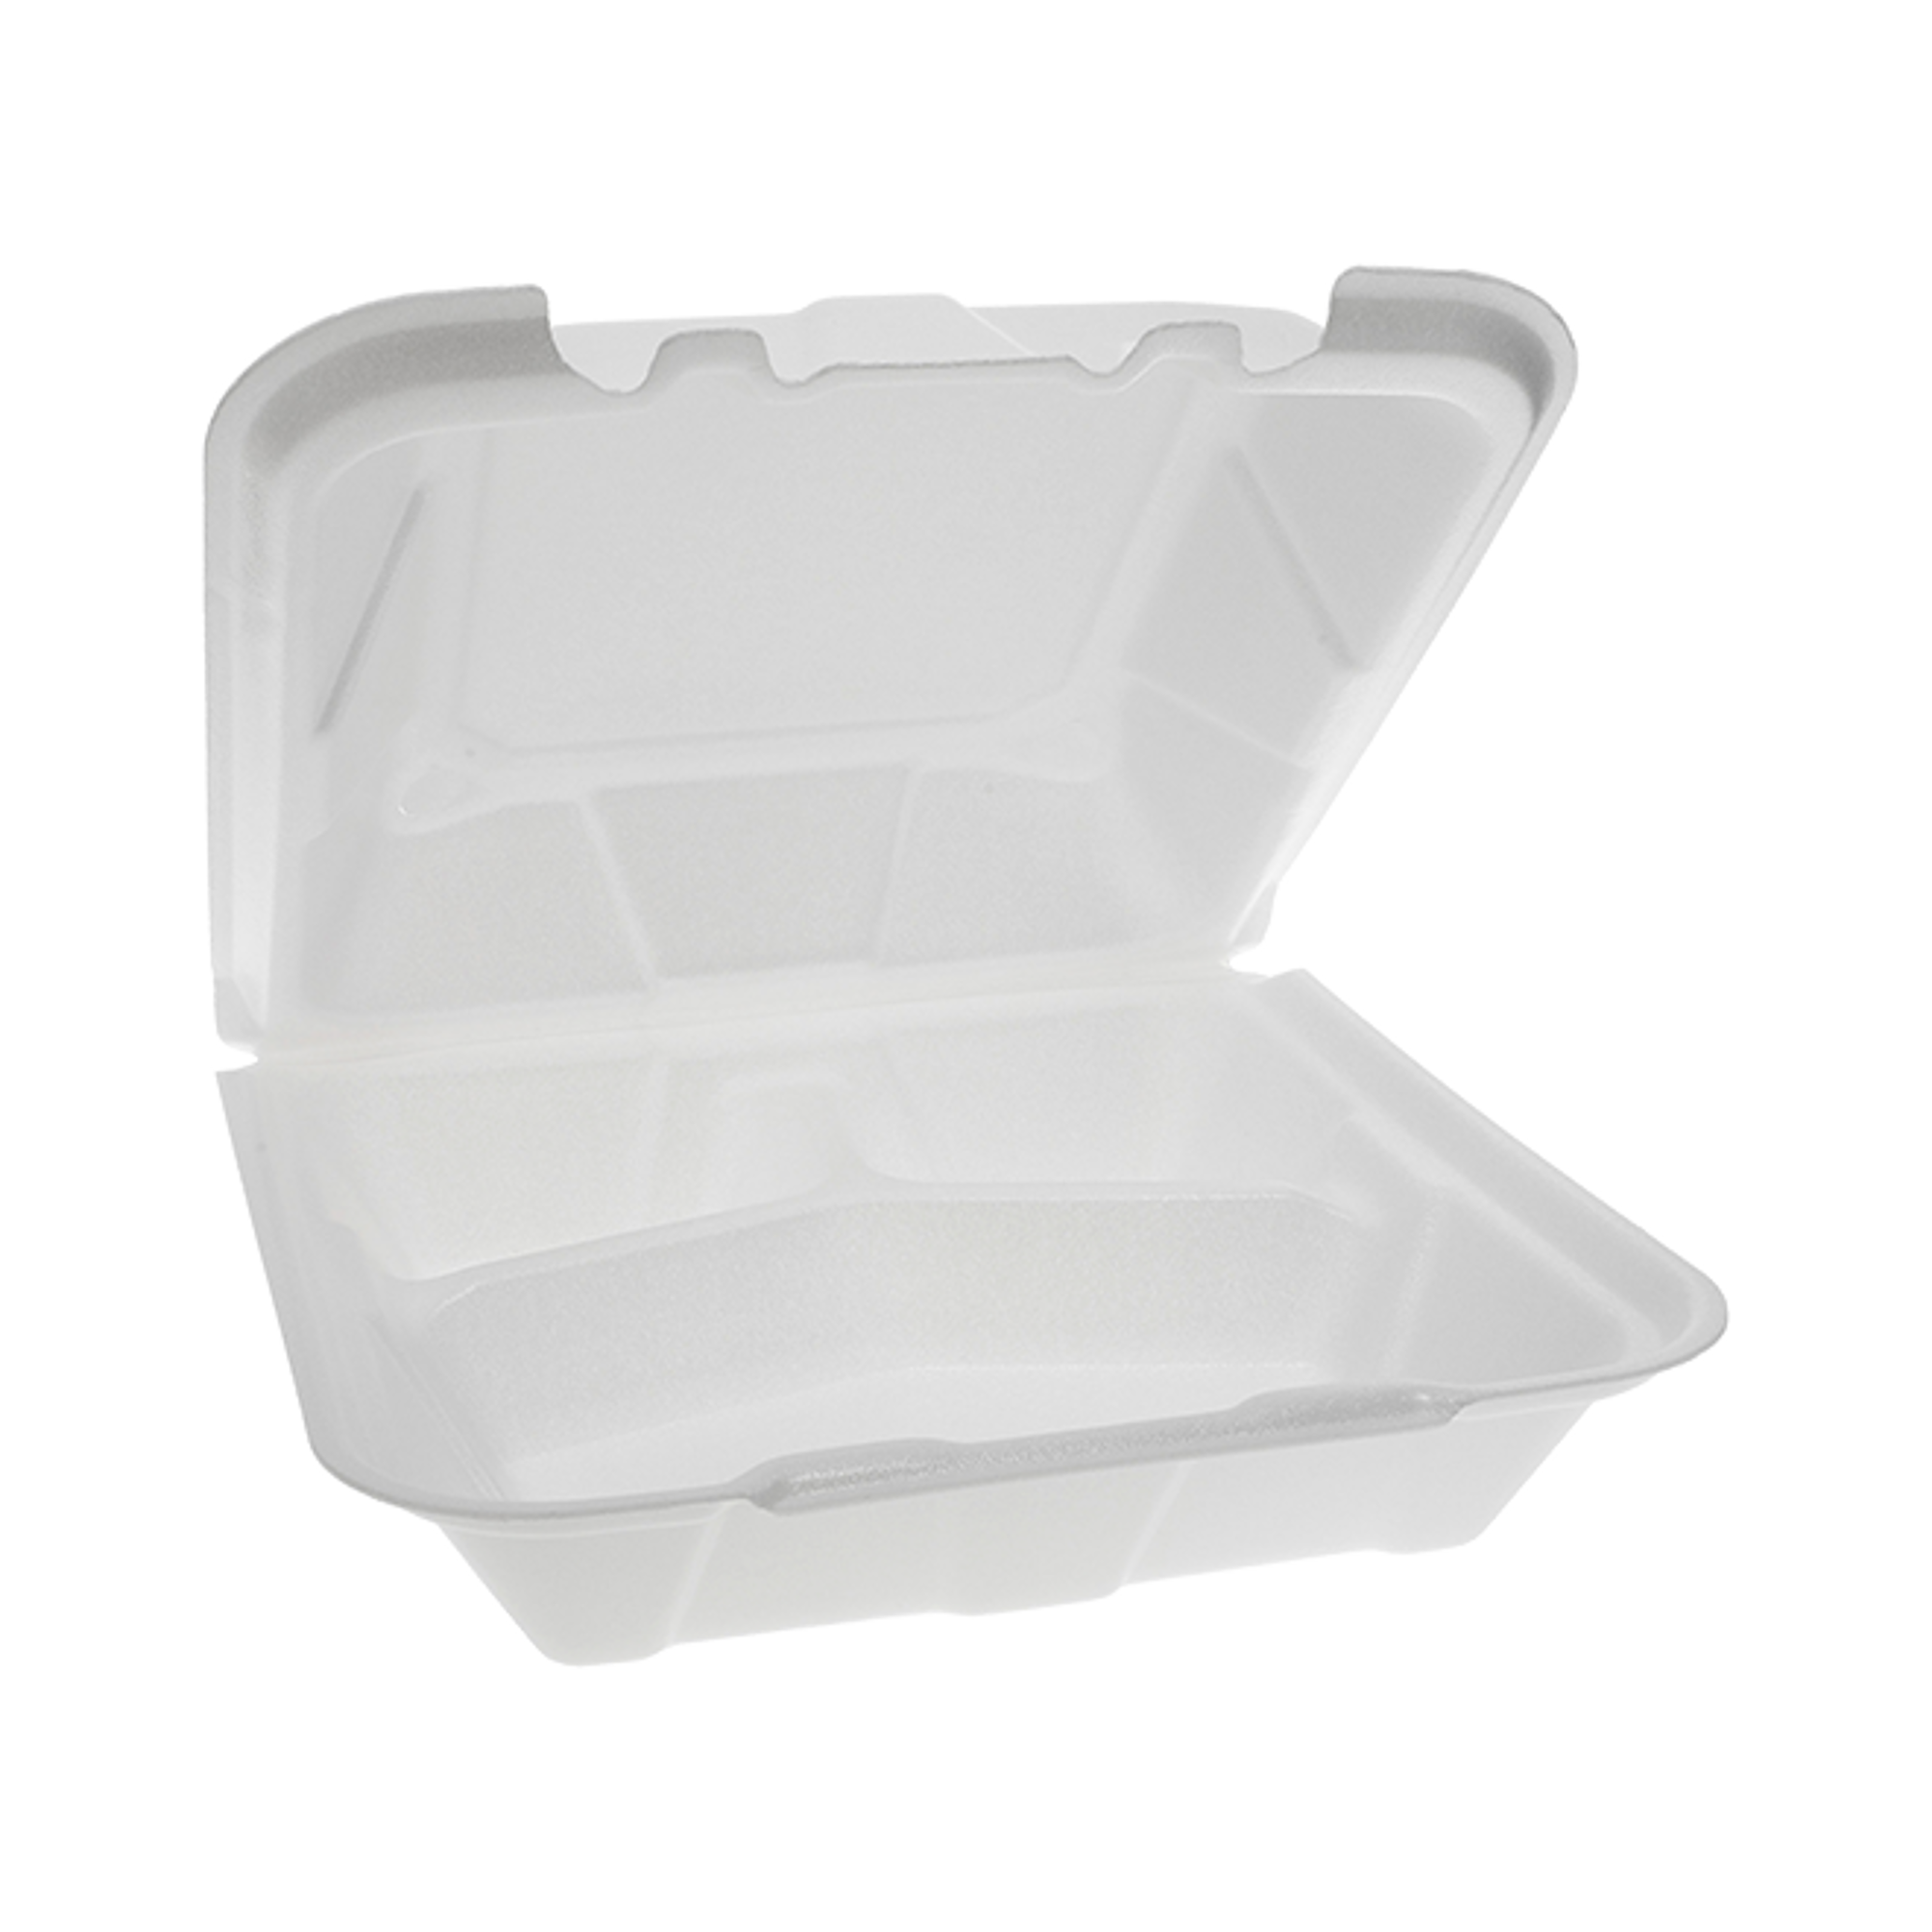 PA-YTD1-9903 Large Foam Three Compartment Container